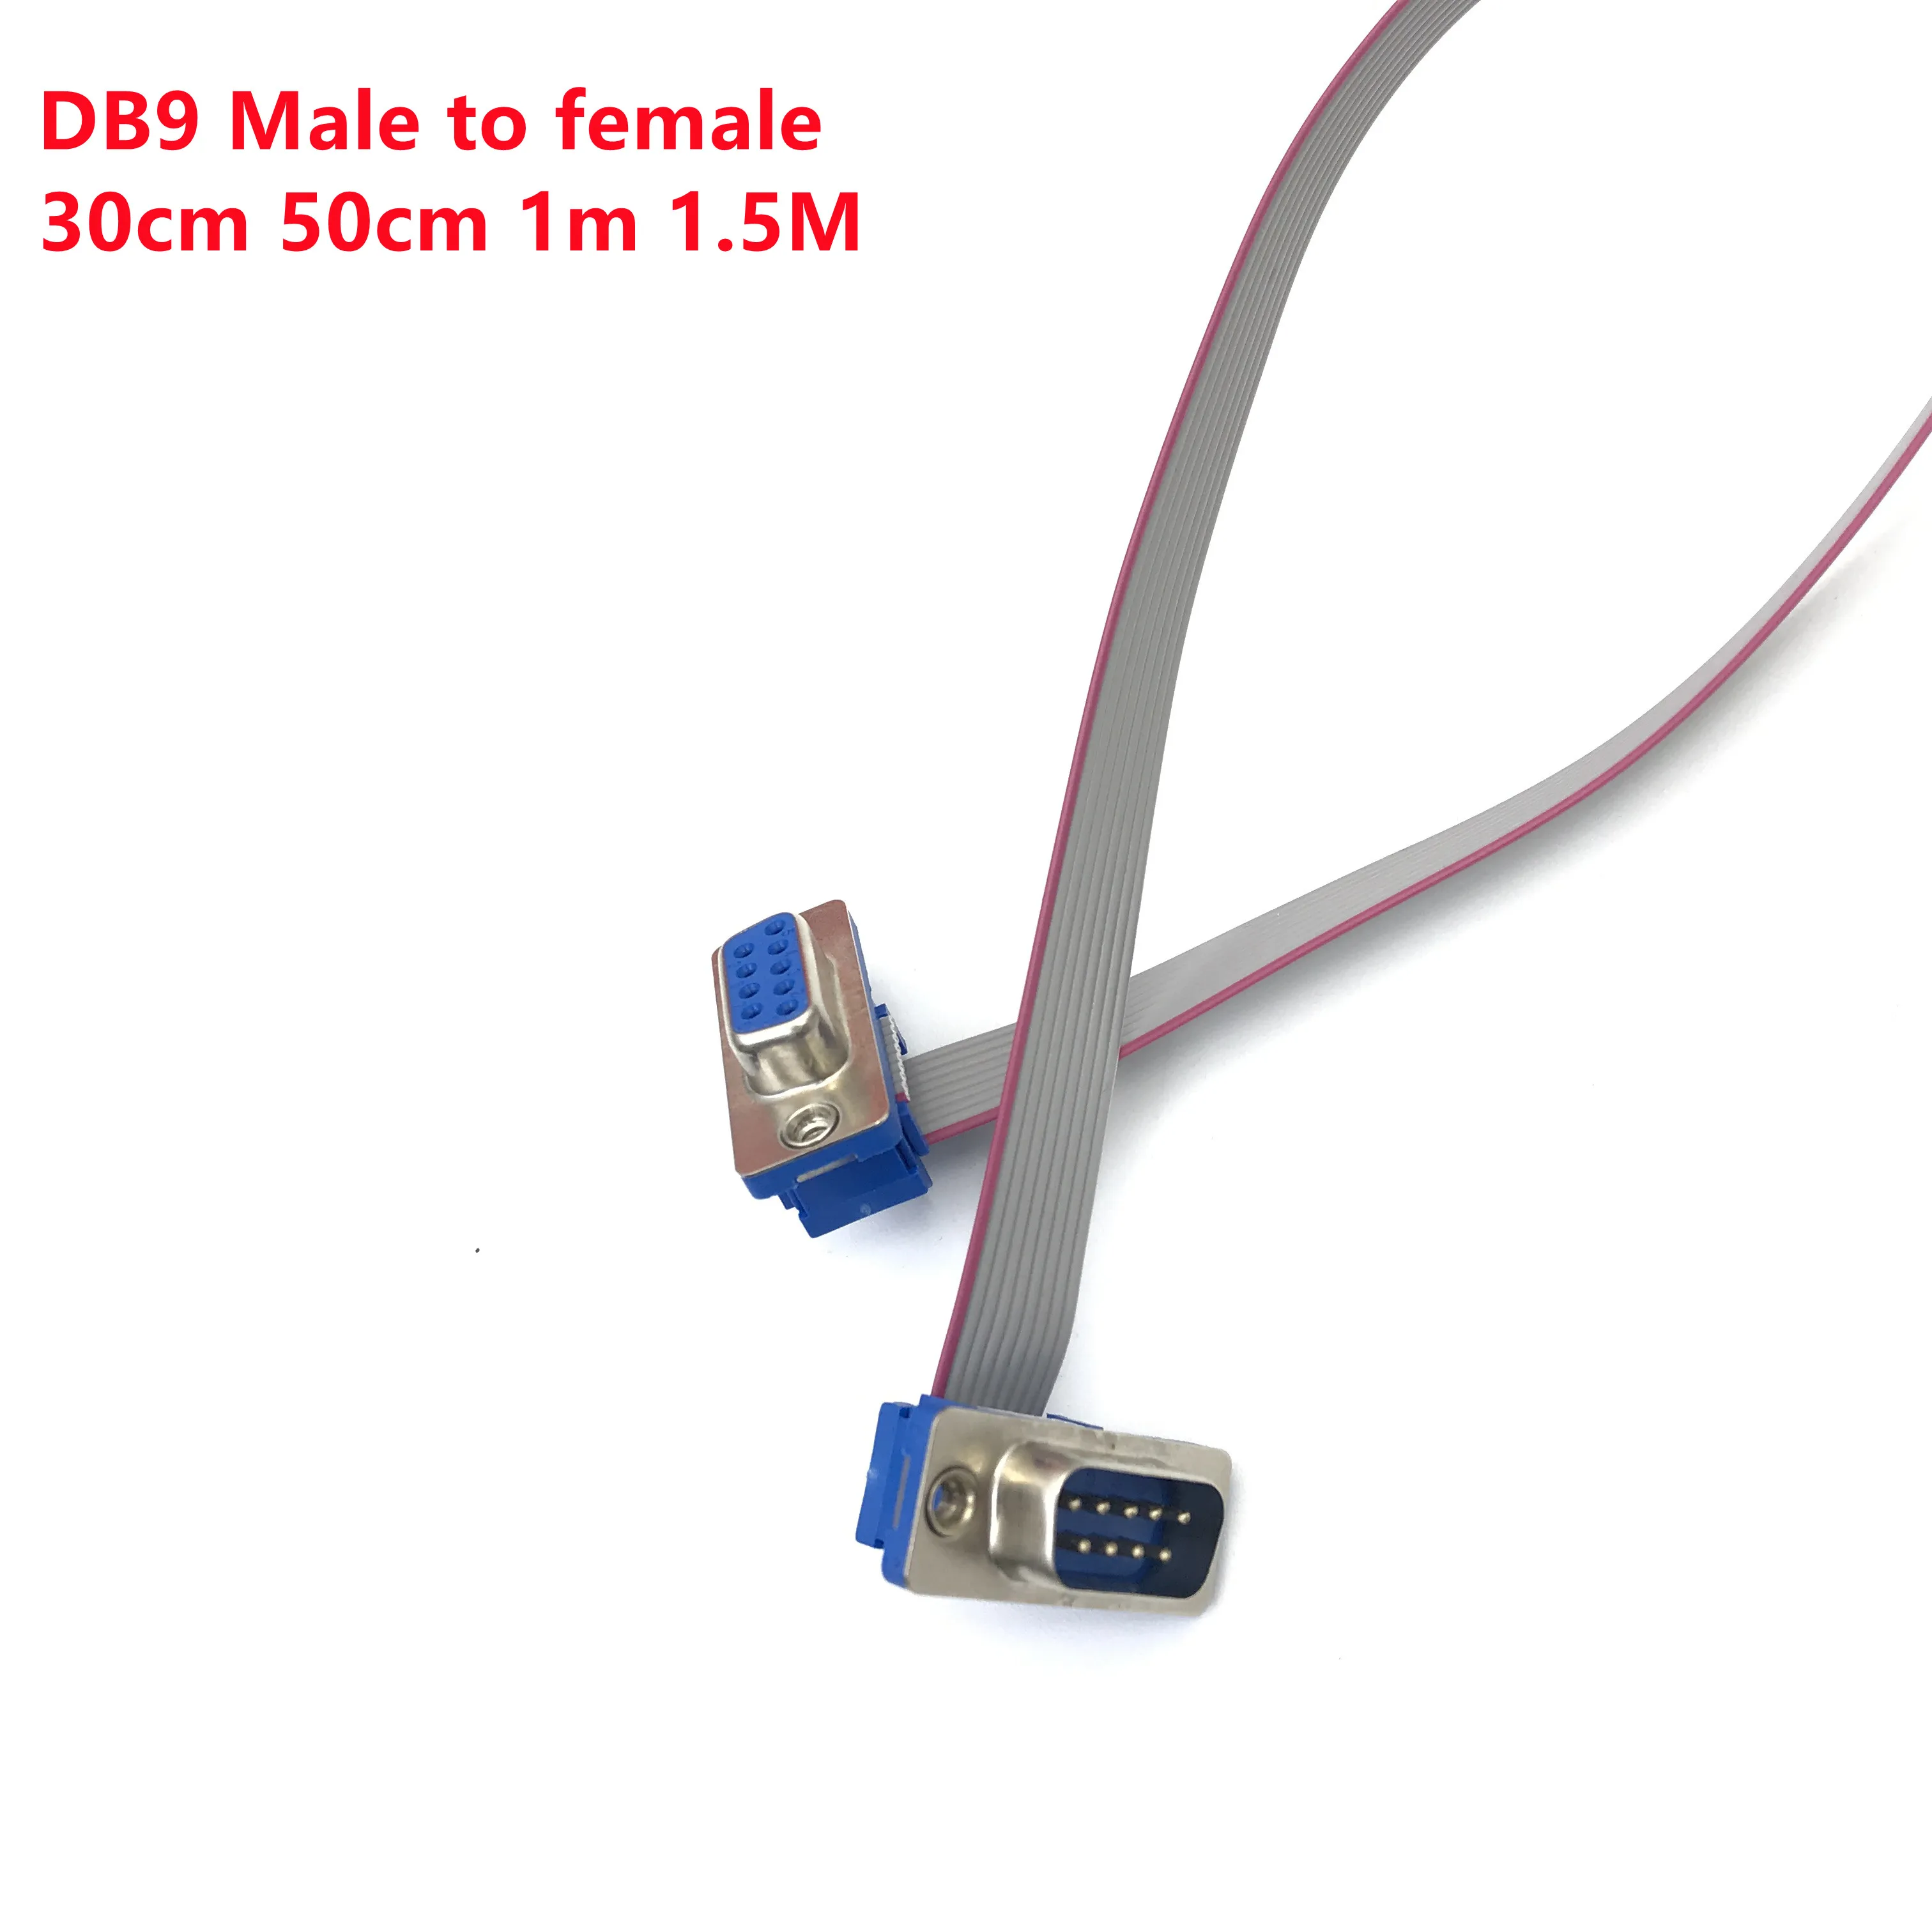 

1PCS 20CM 50CM 1M DB9 MALE to FEMALE CABLE D-Sub serial port connector adapter rs232 com Extension Cable